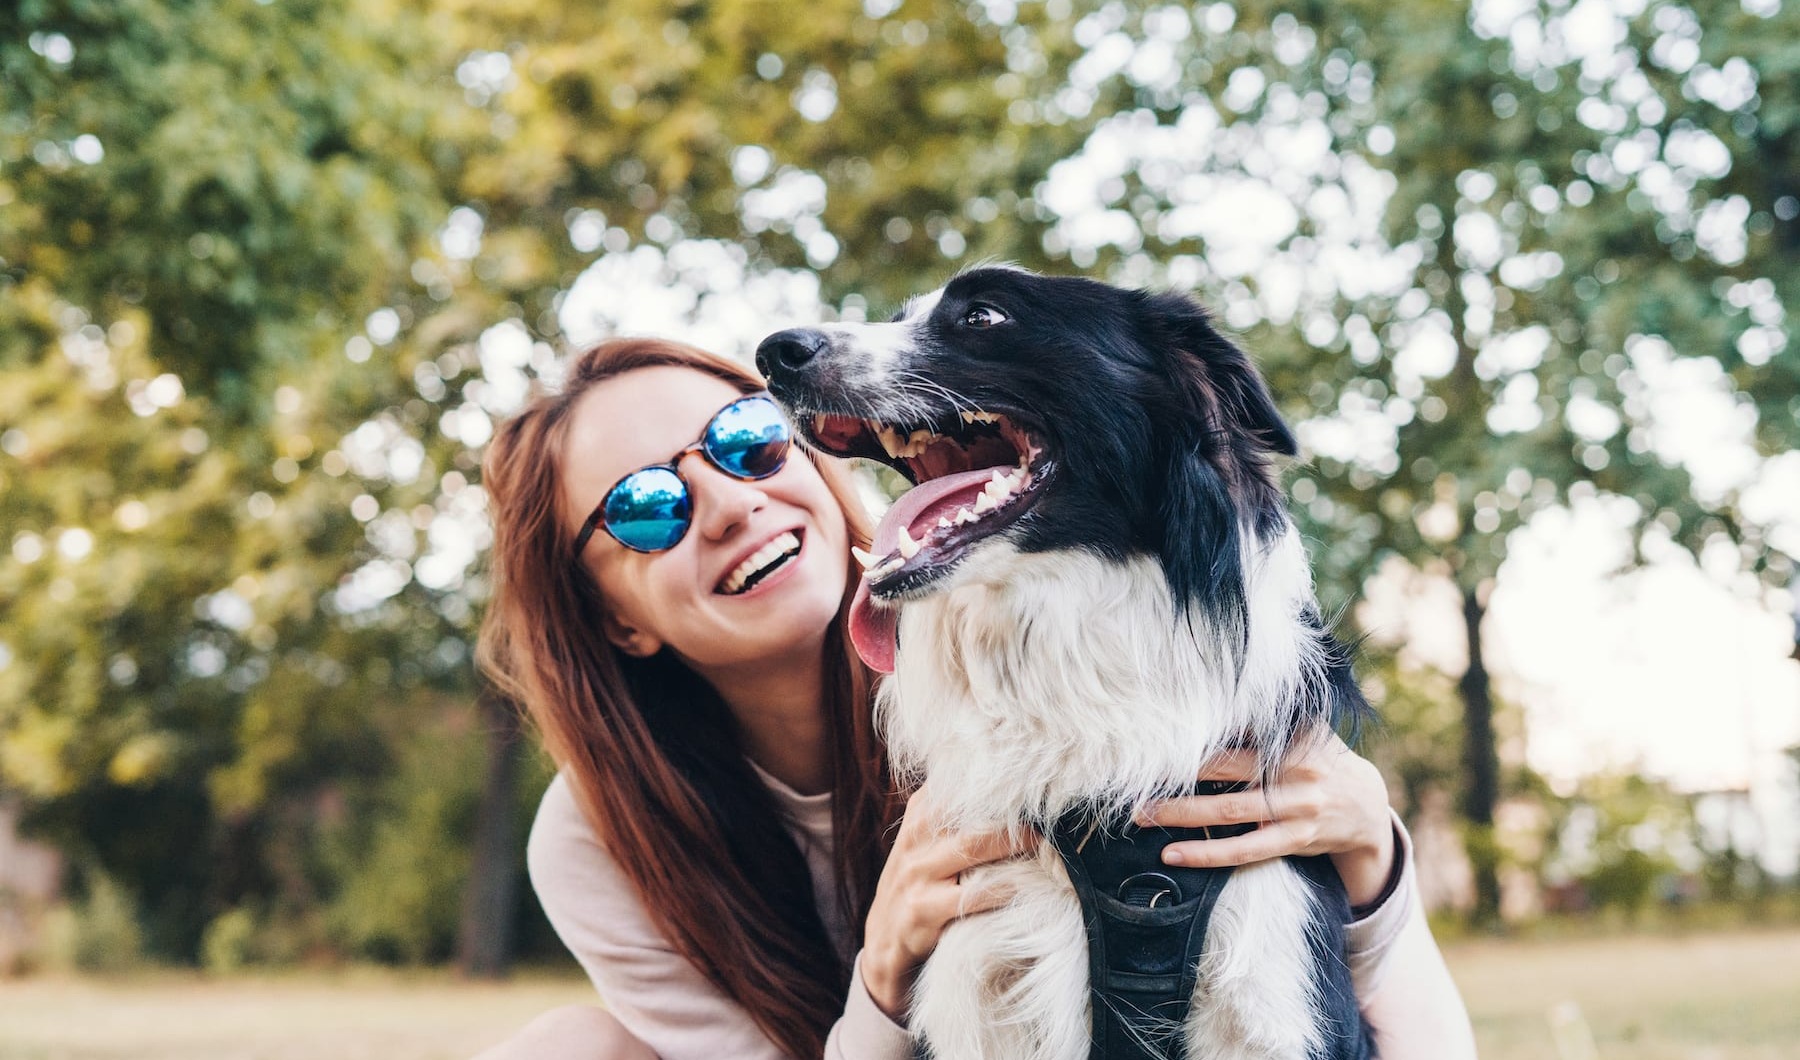 lifestyle image of a woman laughing with a dog outdoors